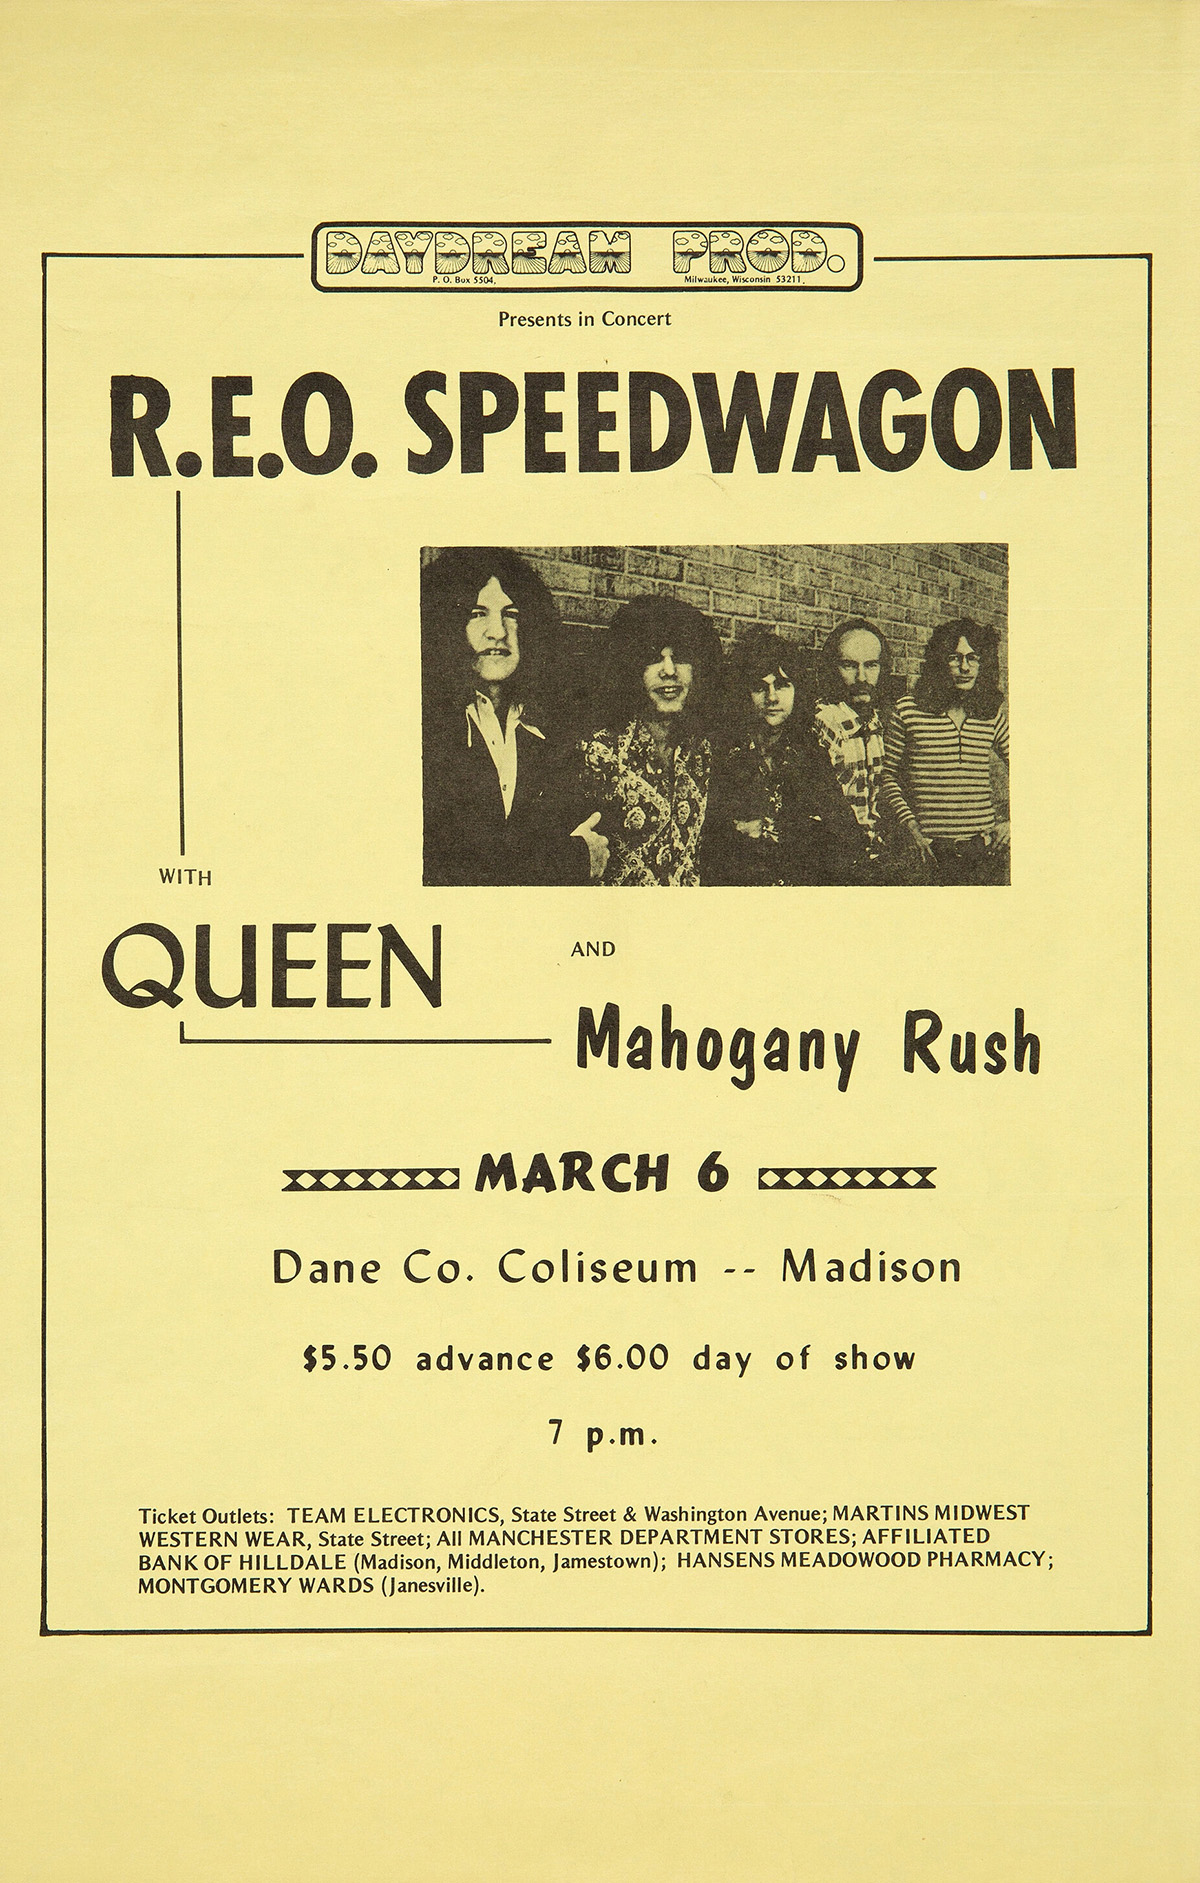 Queen in Madison on 6.3.1975